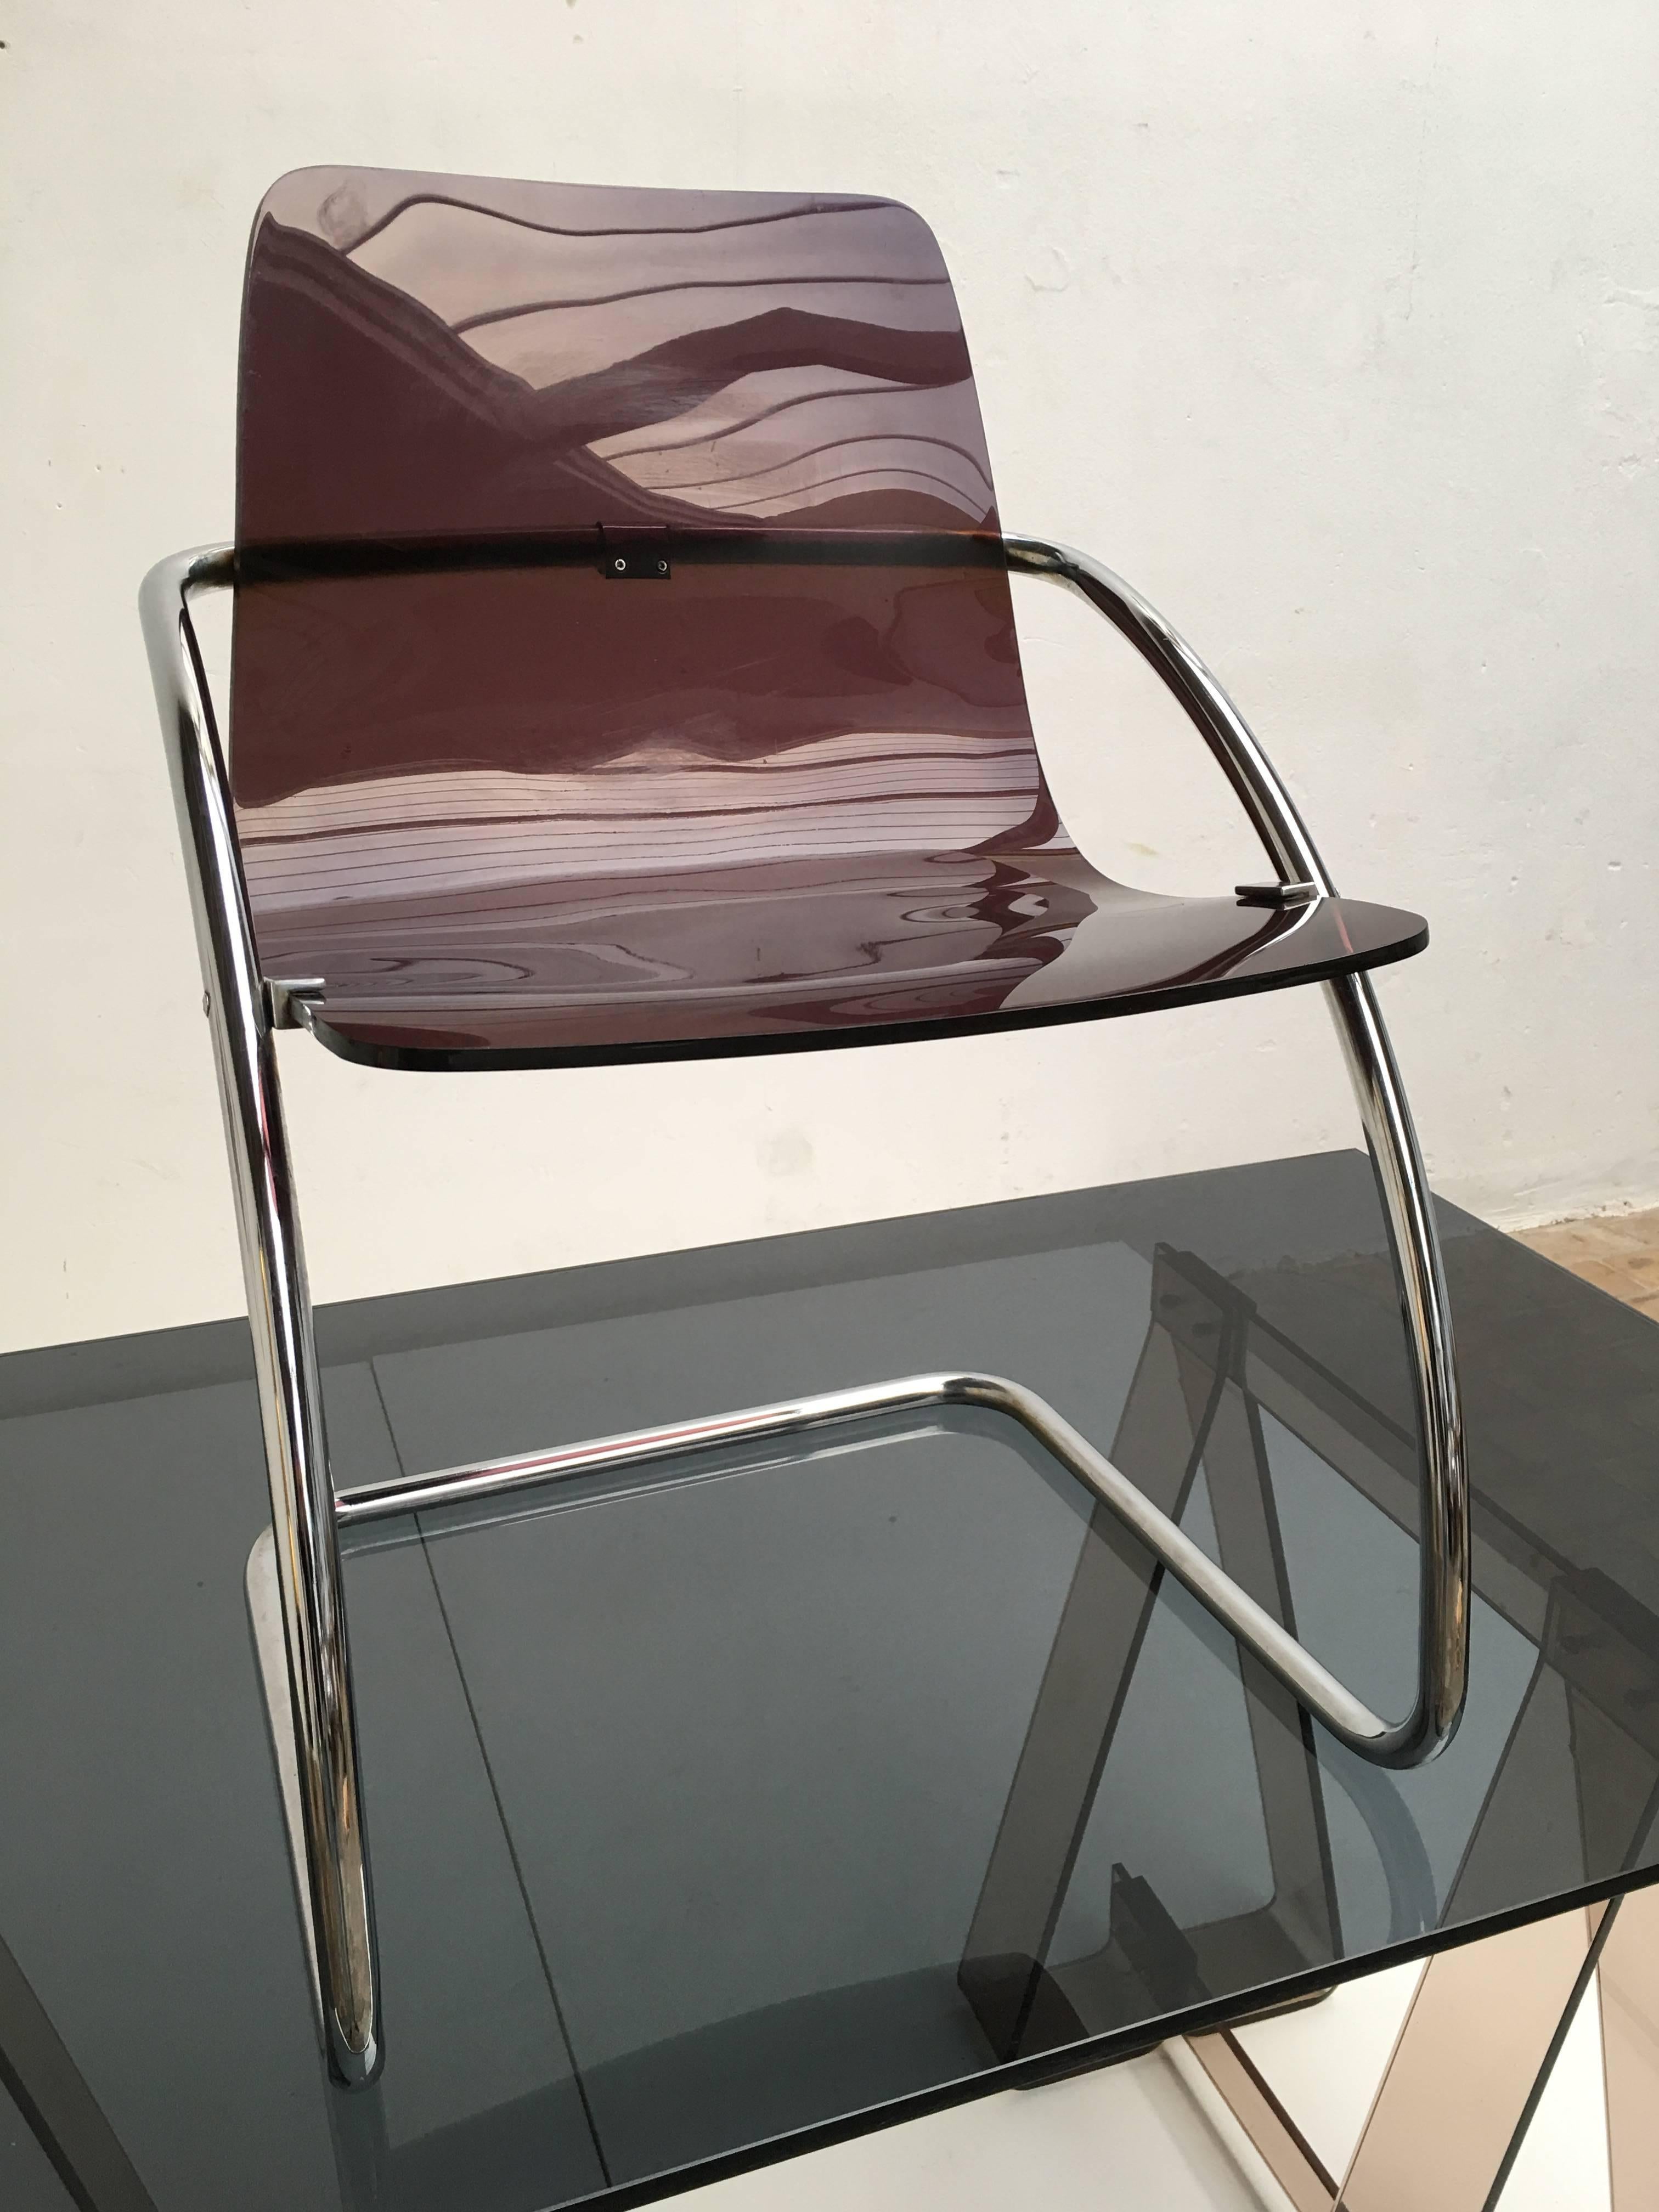 1970s Smoked Acrylic and Glass Trestle Desk, Lucite and Tubular Chrome Chair 1